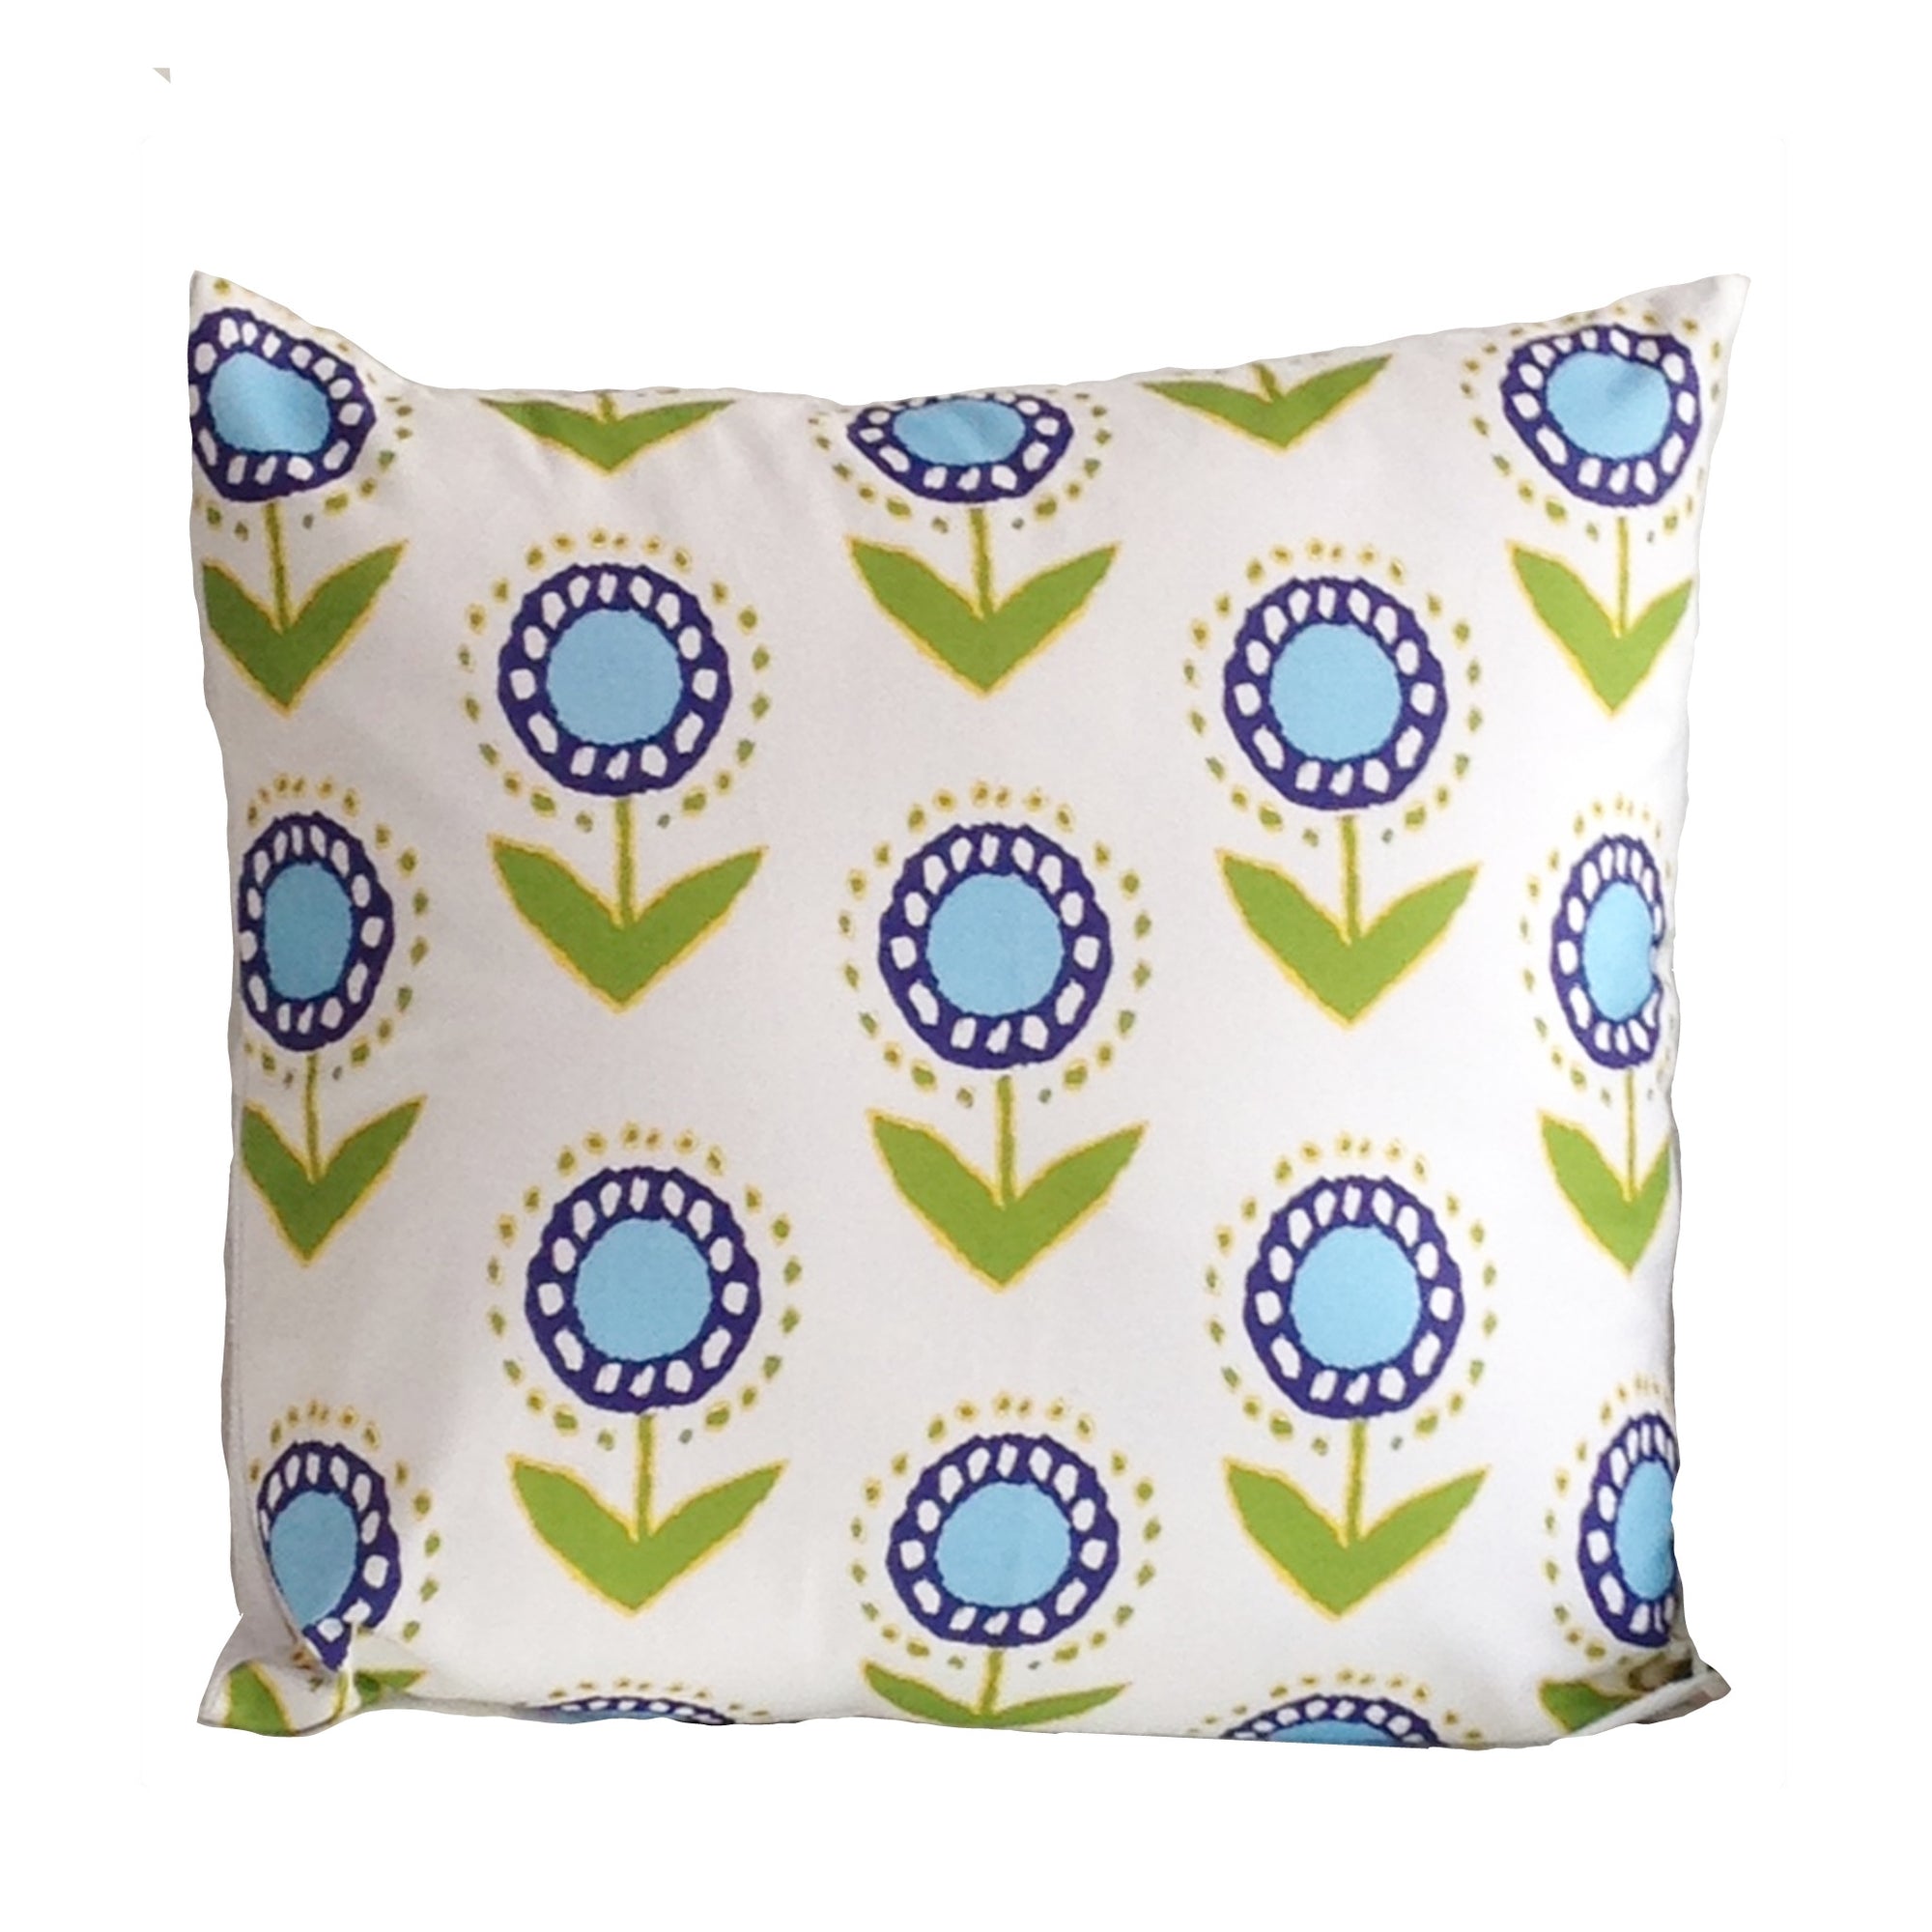 Dana Gibson Posey Ikat in Turquoise on White 22" Pillow